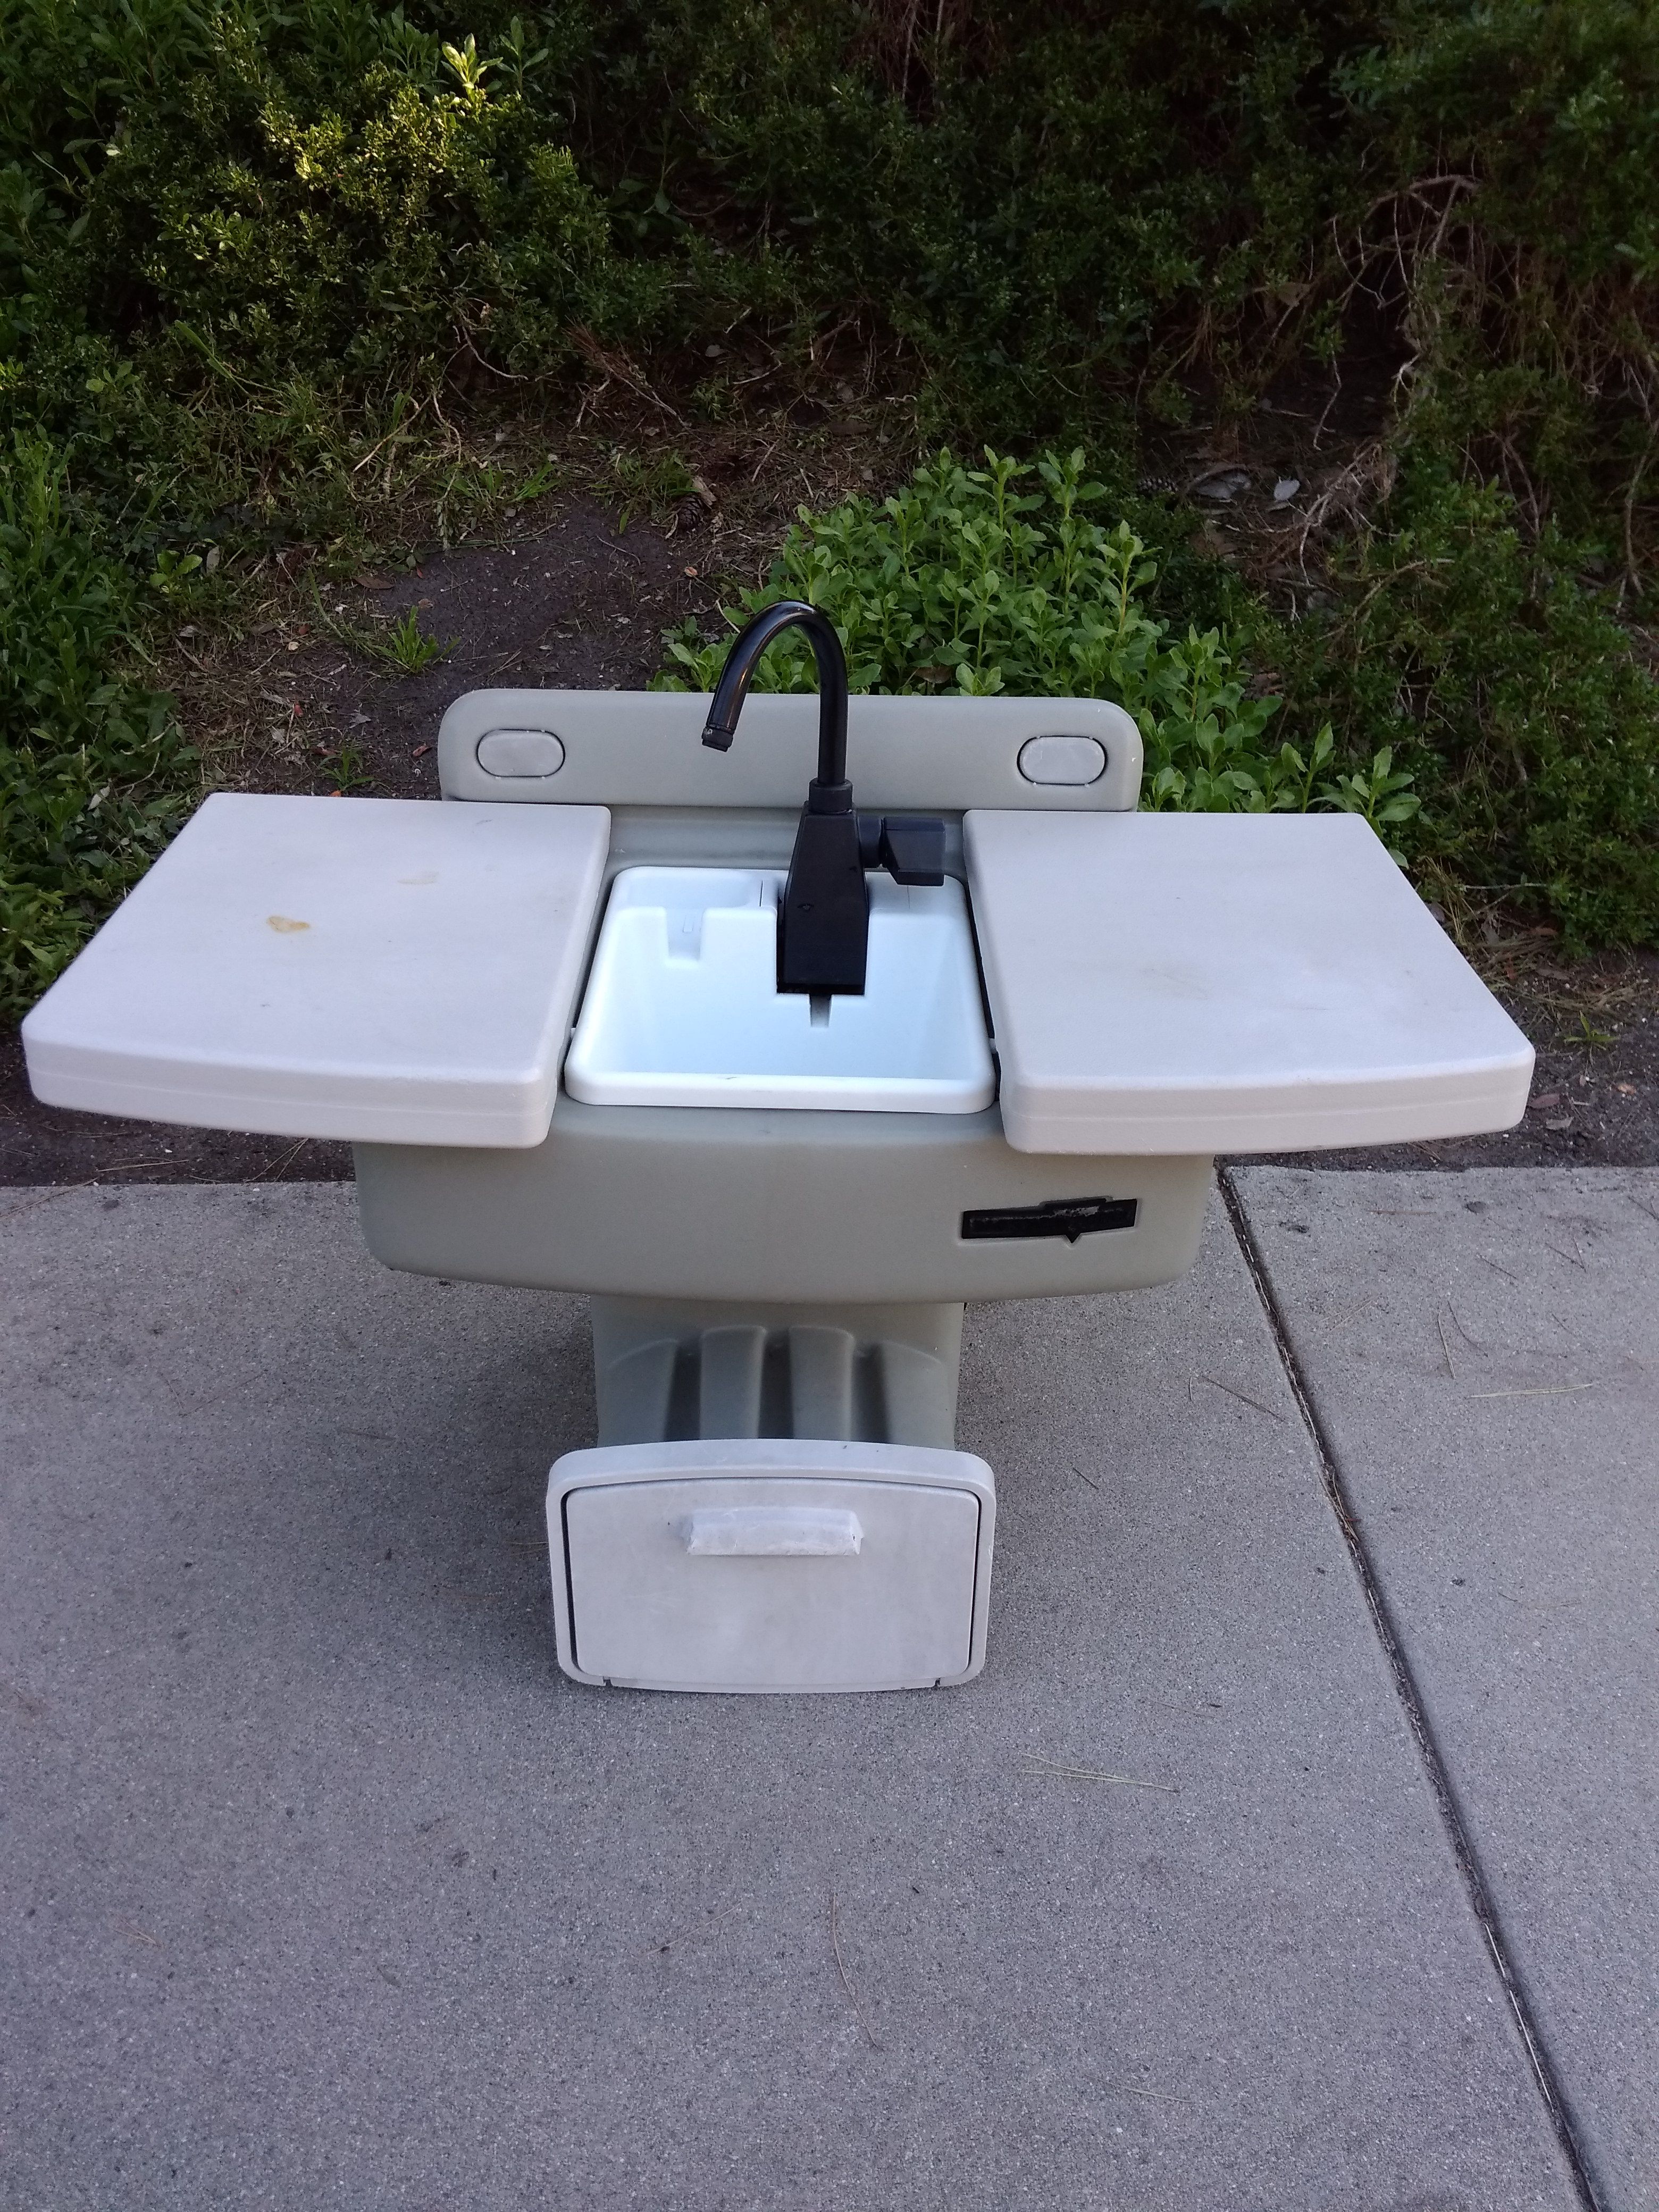 Portable Outdoor Sink with Hose Hanger